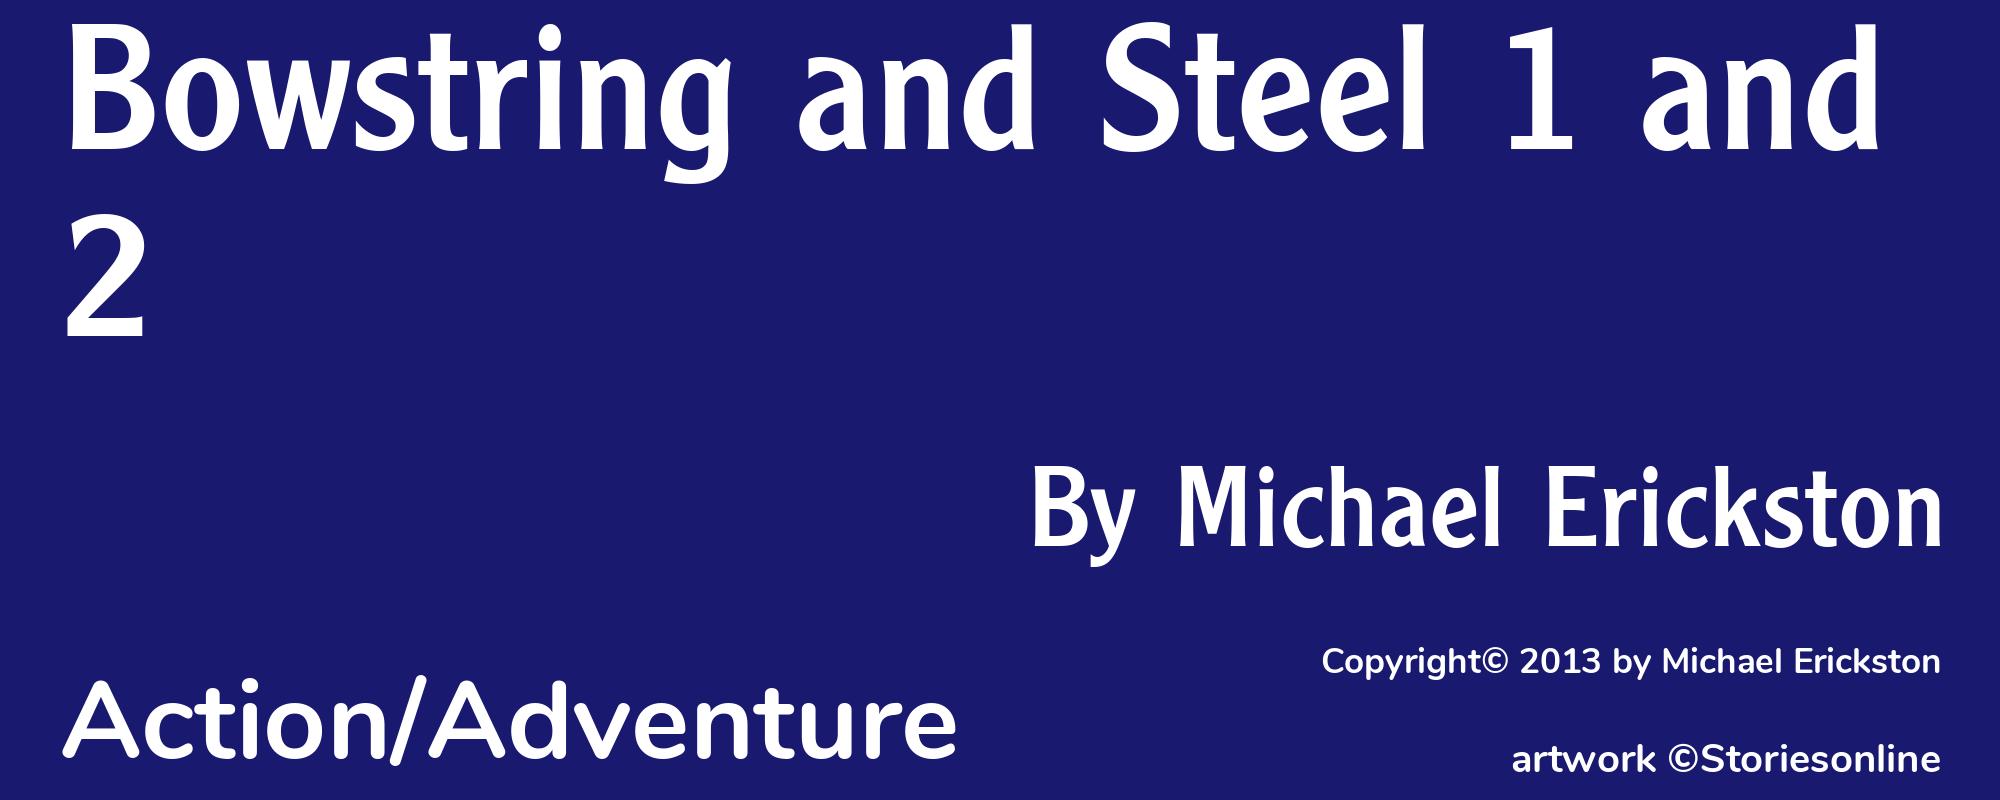 Bowstring and Steel 1 and 2 - Cover